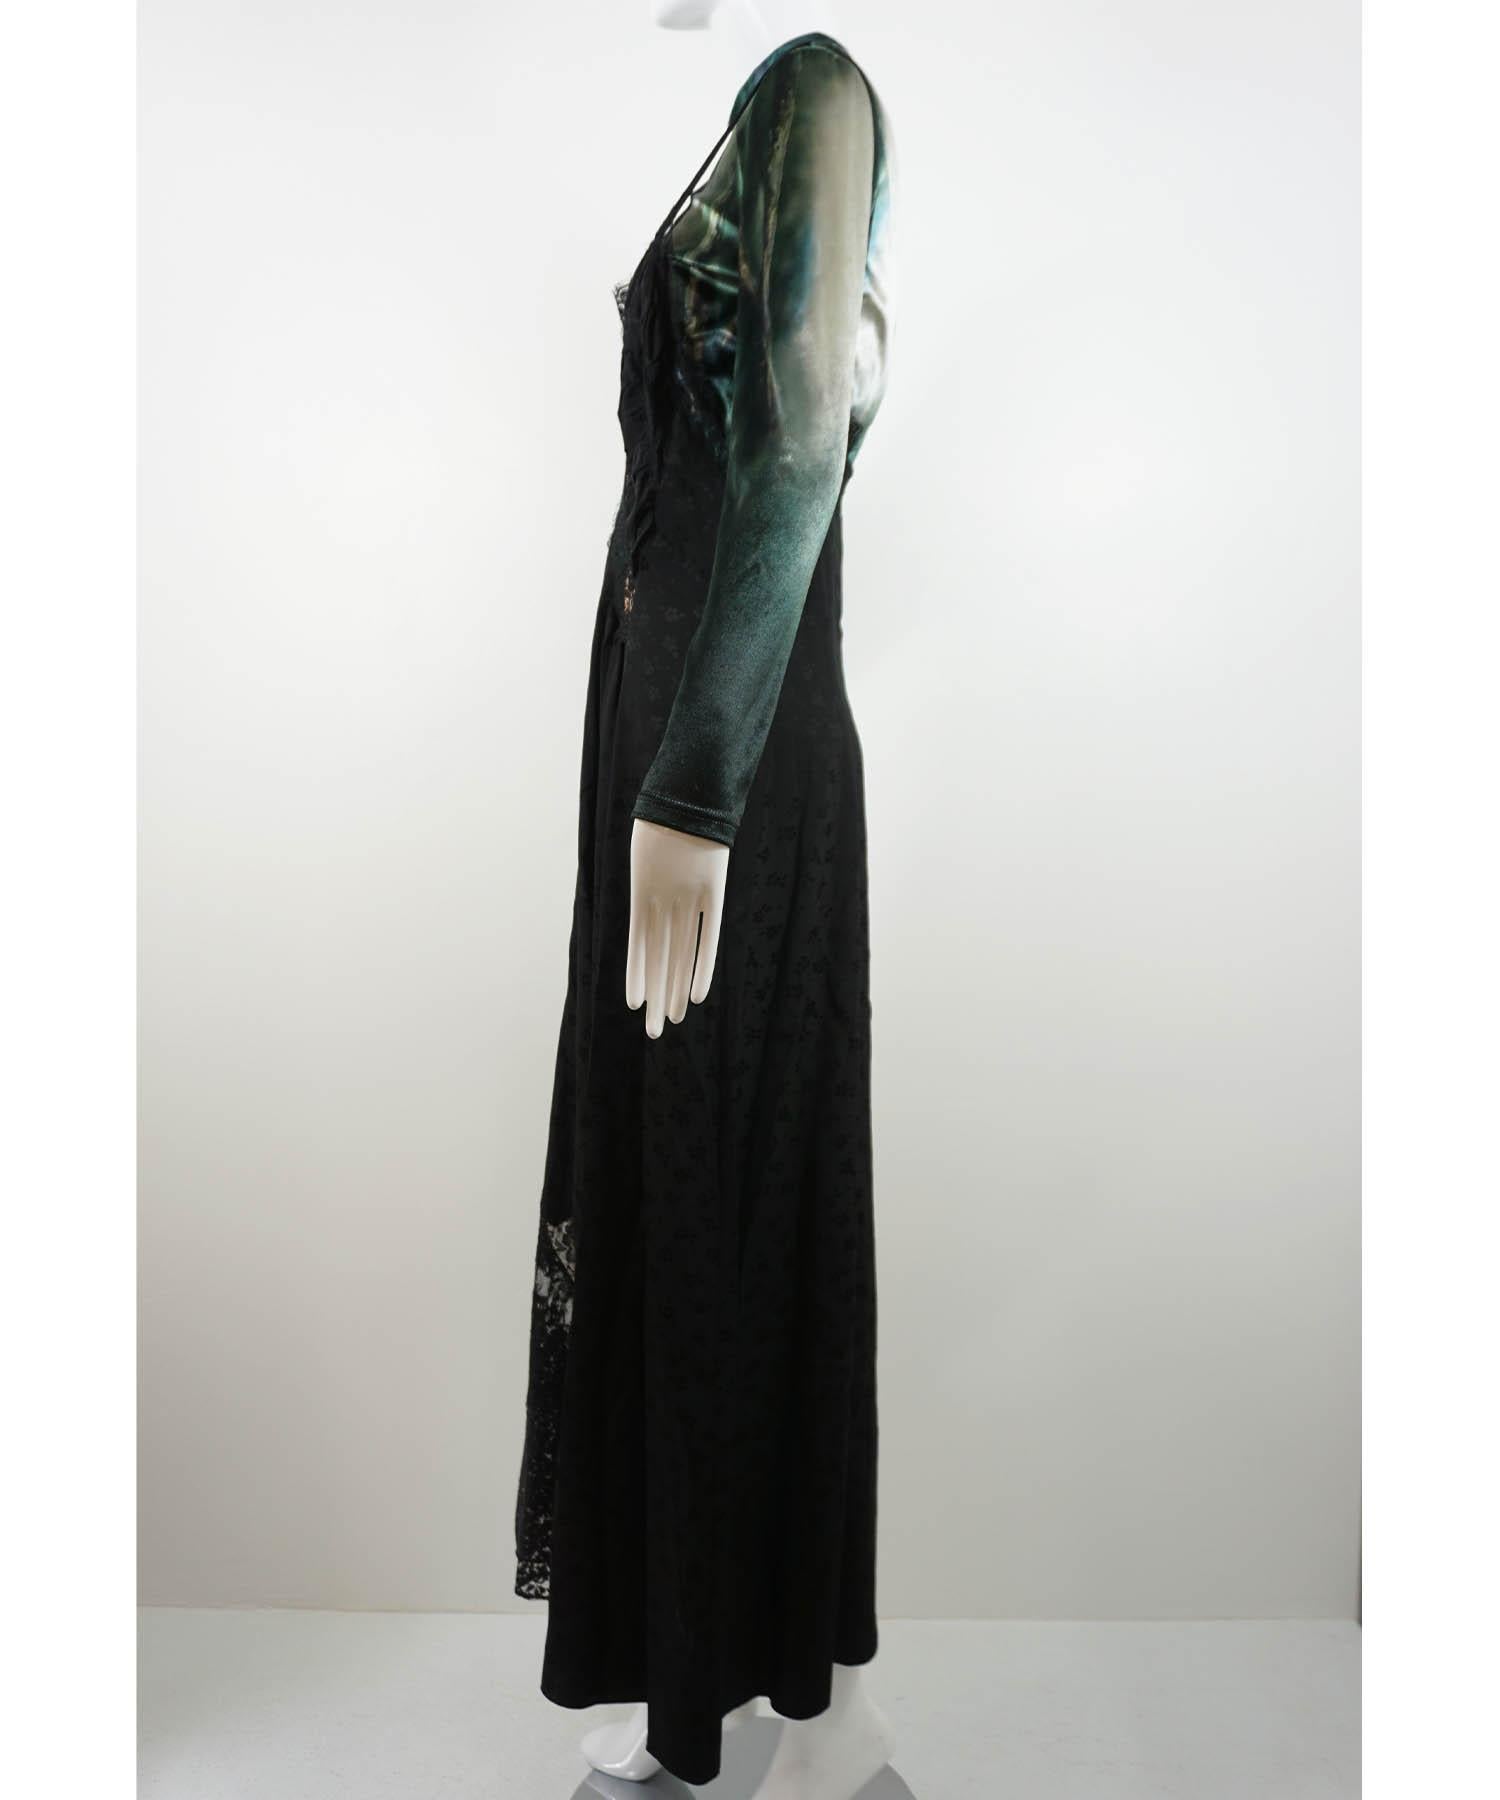 Stella McCartney 2pc Dress: Face Print Top & Black Lace Maxi Dress 42/6 In New Condition For Sale In Carmel, CA